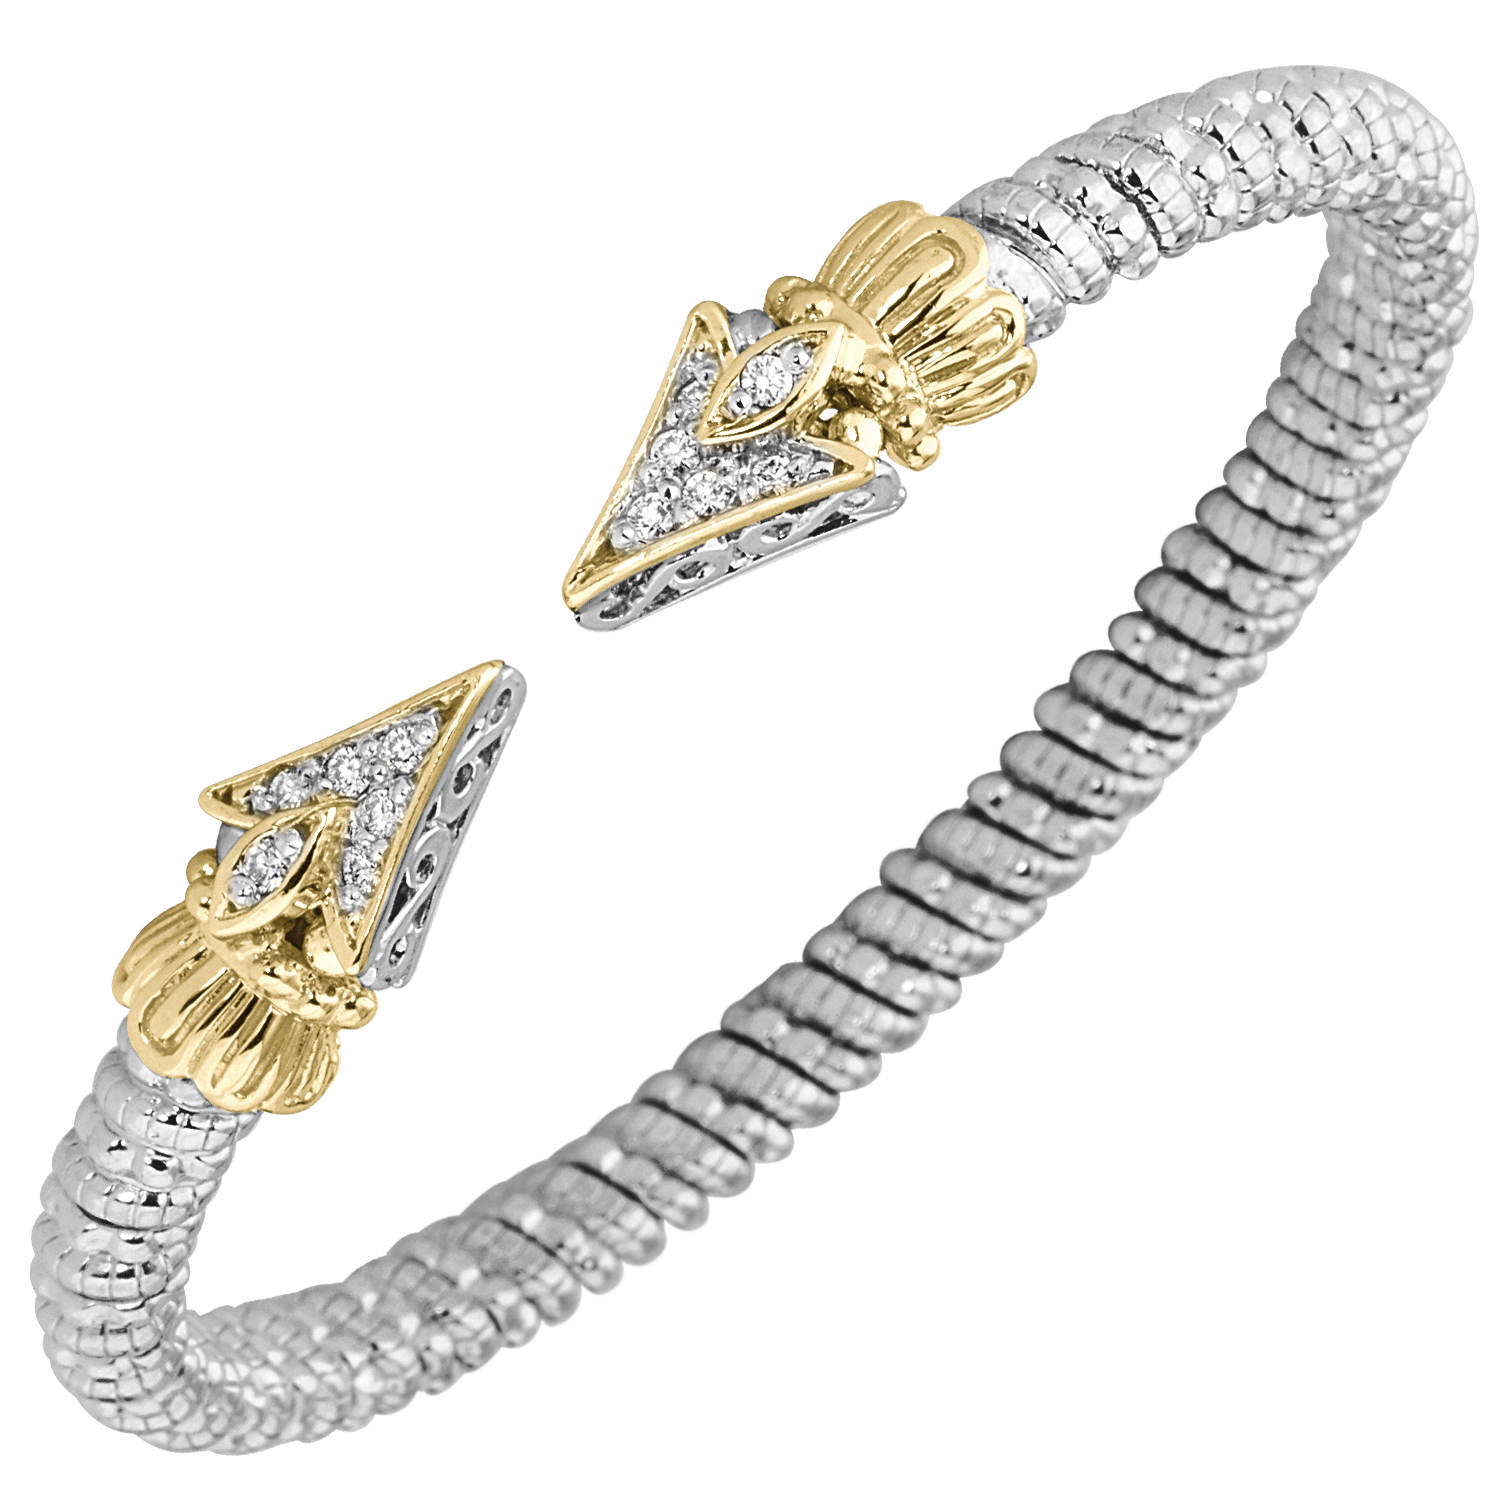 Vahan Arrow Sterling Silver & Yellow Gold Diamond Bracelet Galloway and Moseley, Inc. Sumter, SC